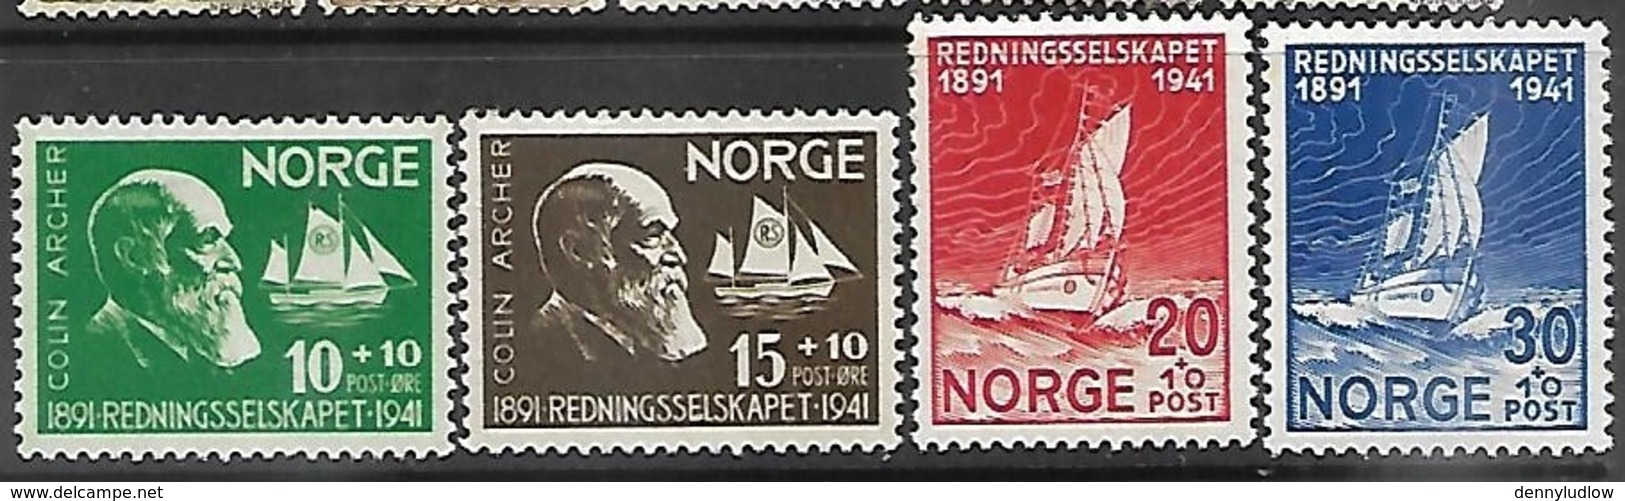 Norway   1941   Sc#B20-3  Lifeboat Charities Set   MH    2016 Scott Value $8.50 - Unused Stamps